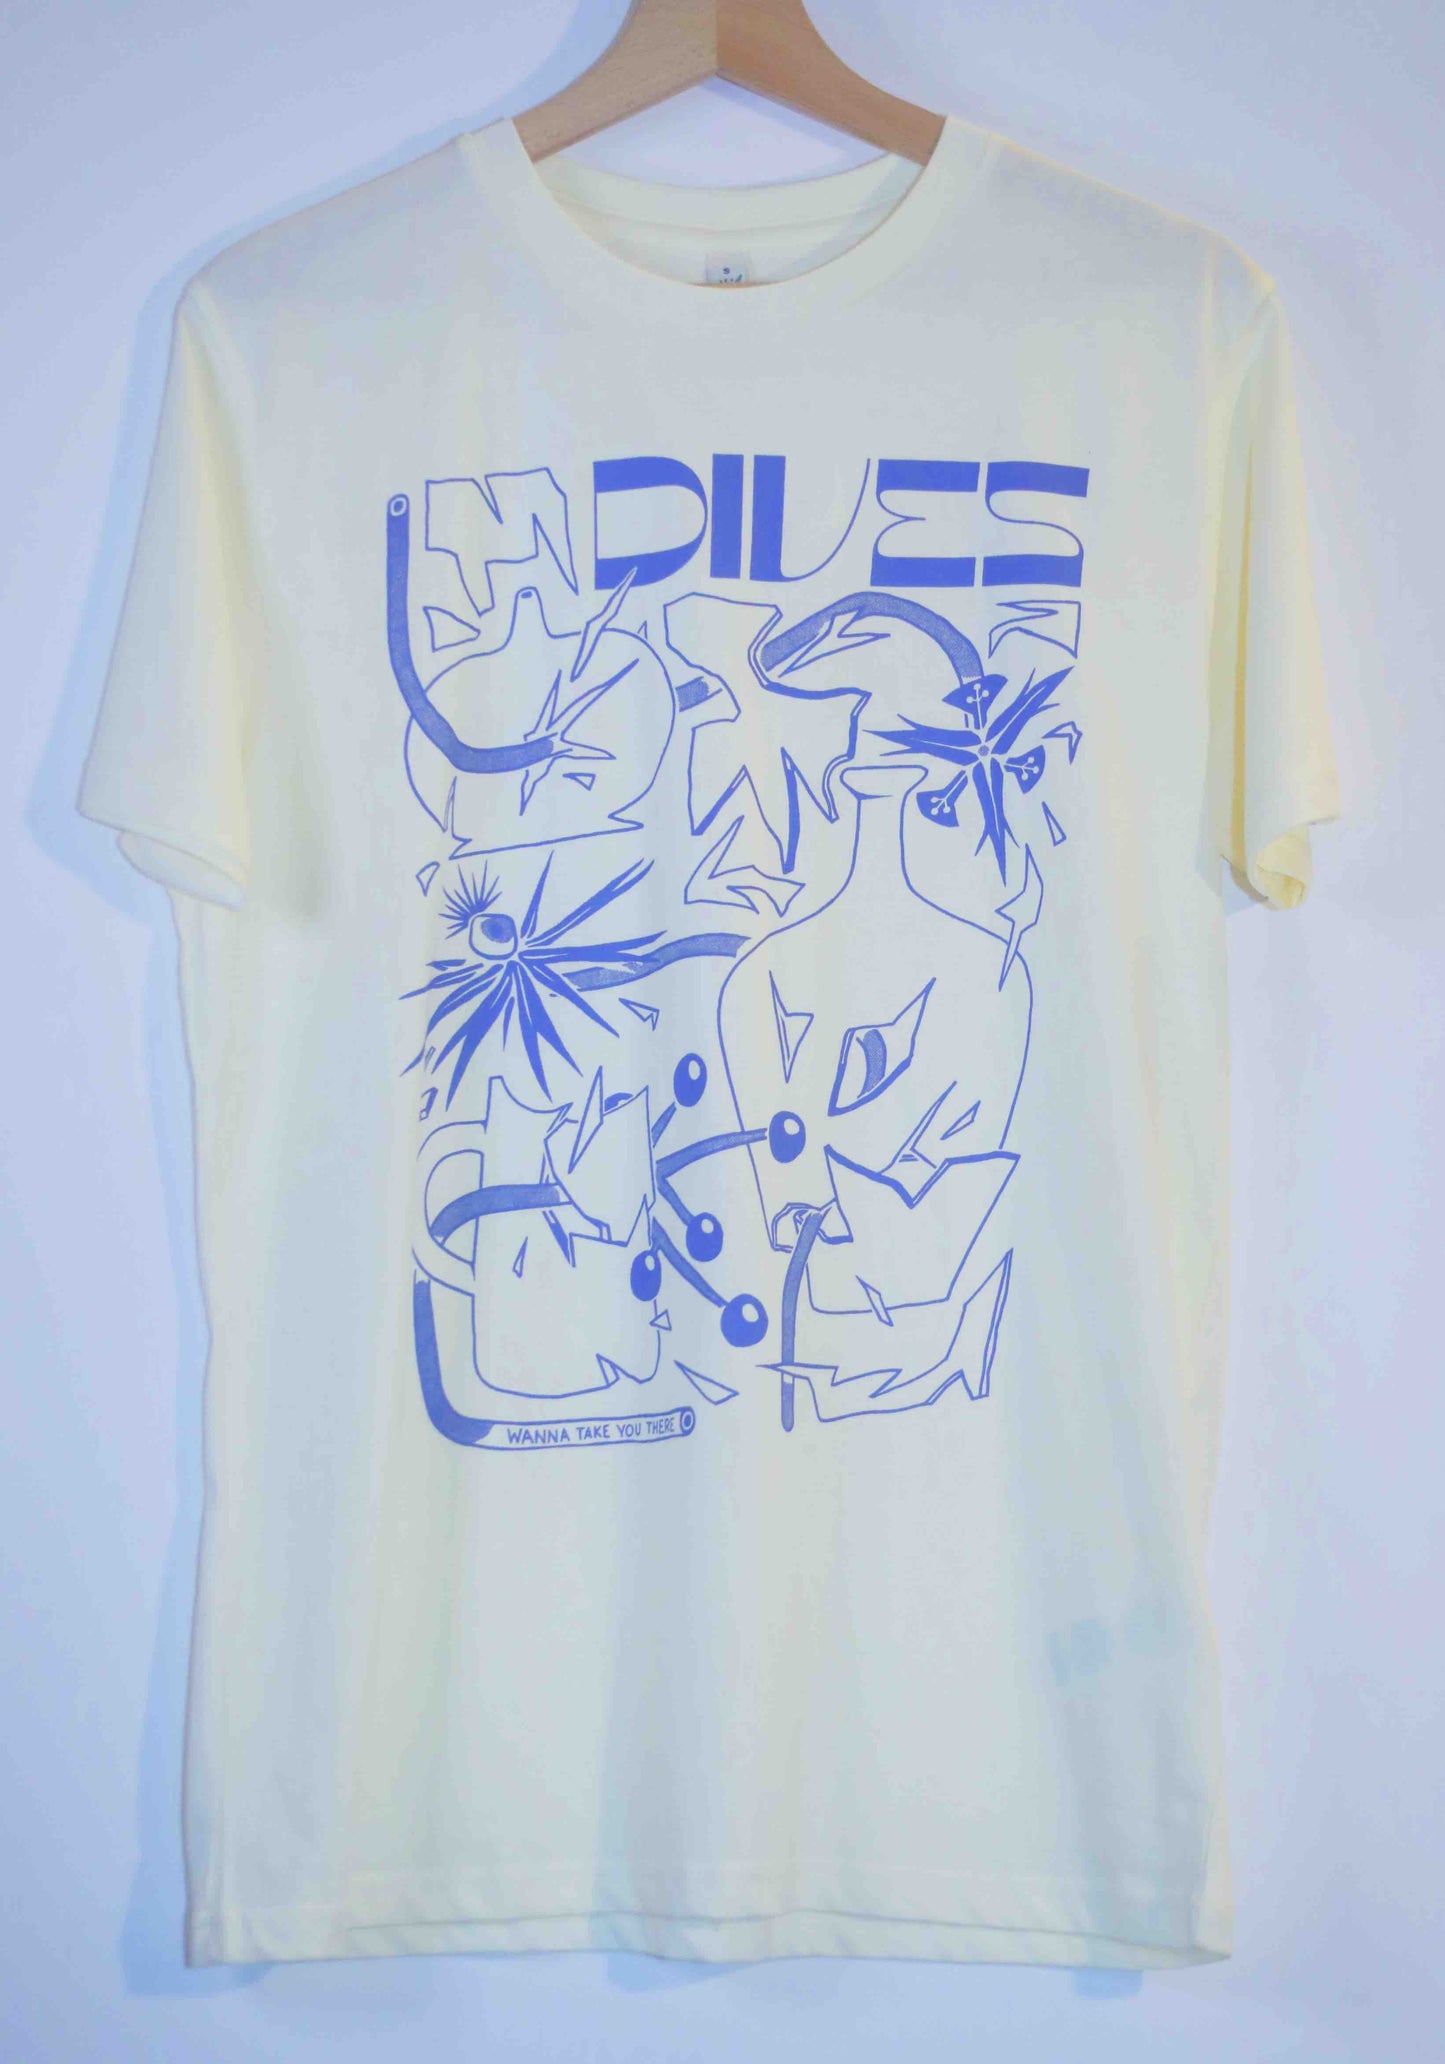 DIVES - Shirt "Wanna Take You There"